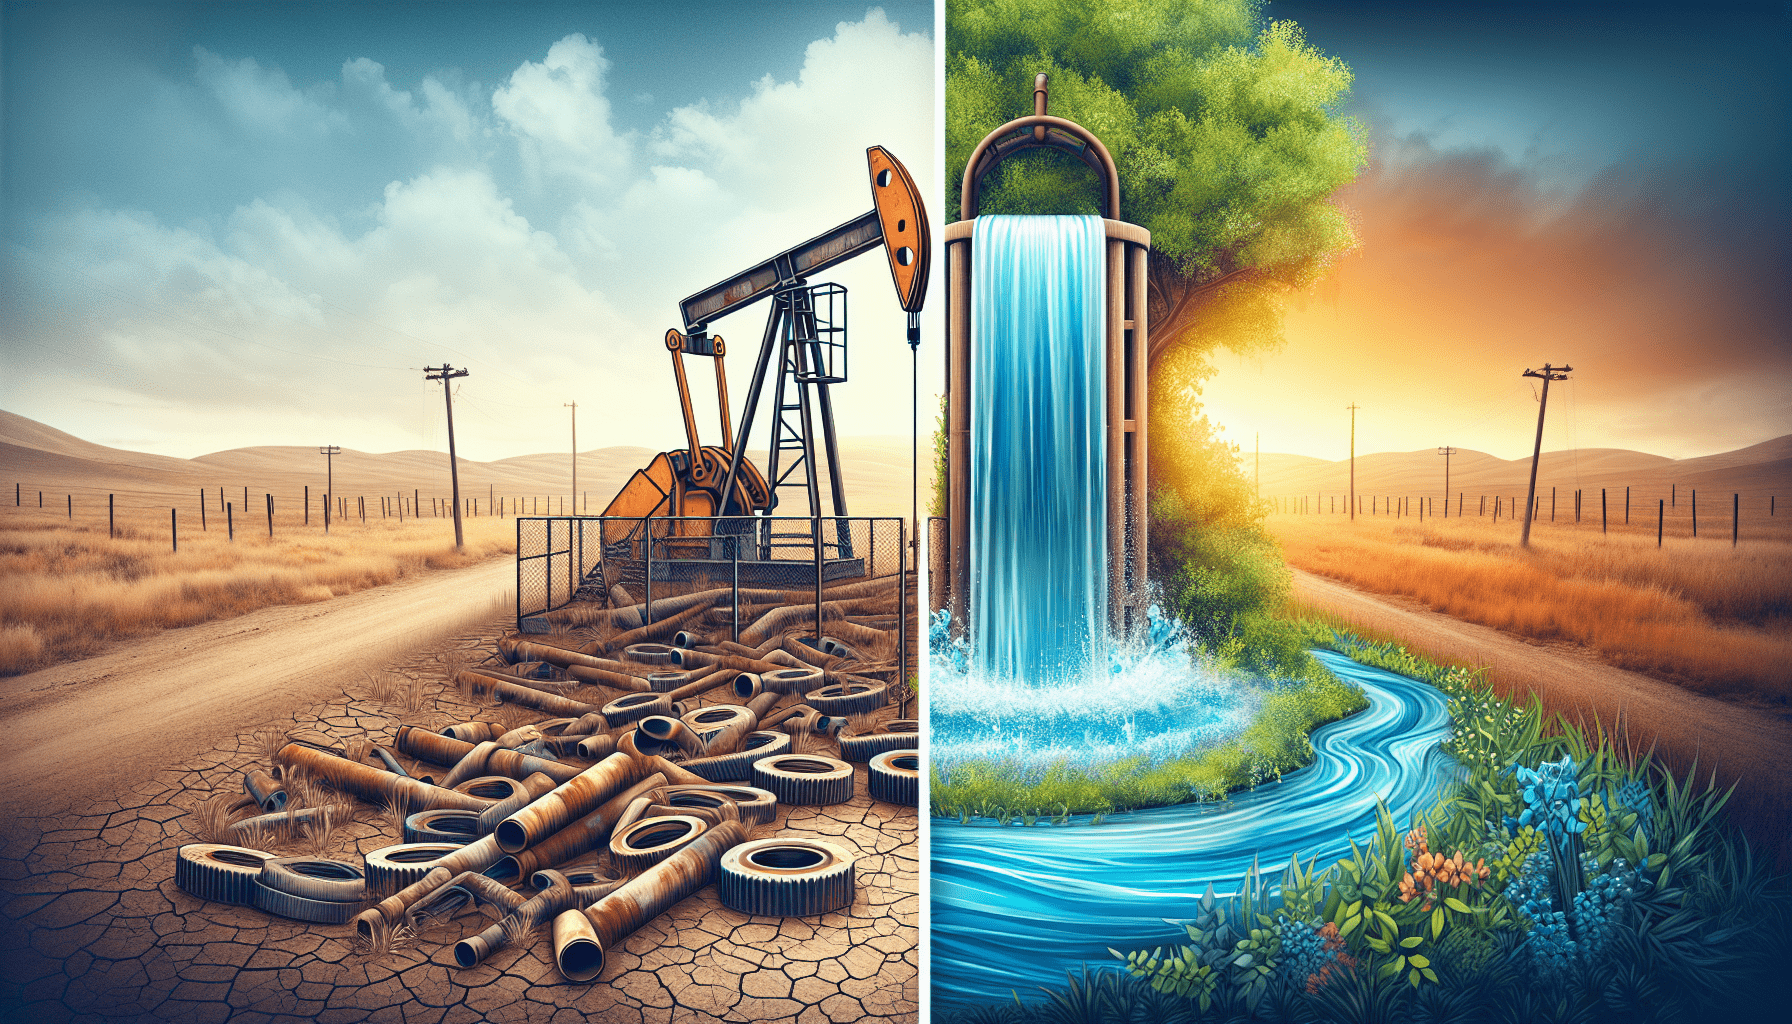 Converting orphaned oil wells to water wells has run into some resistance